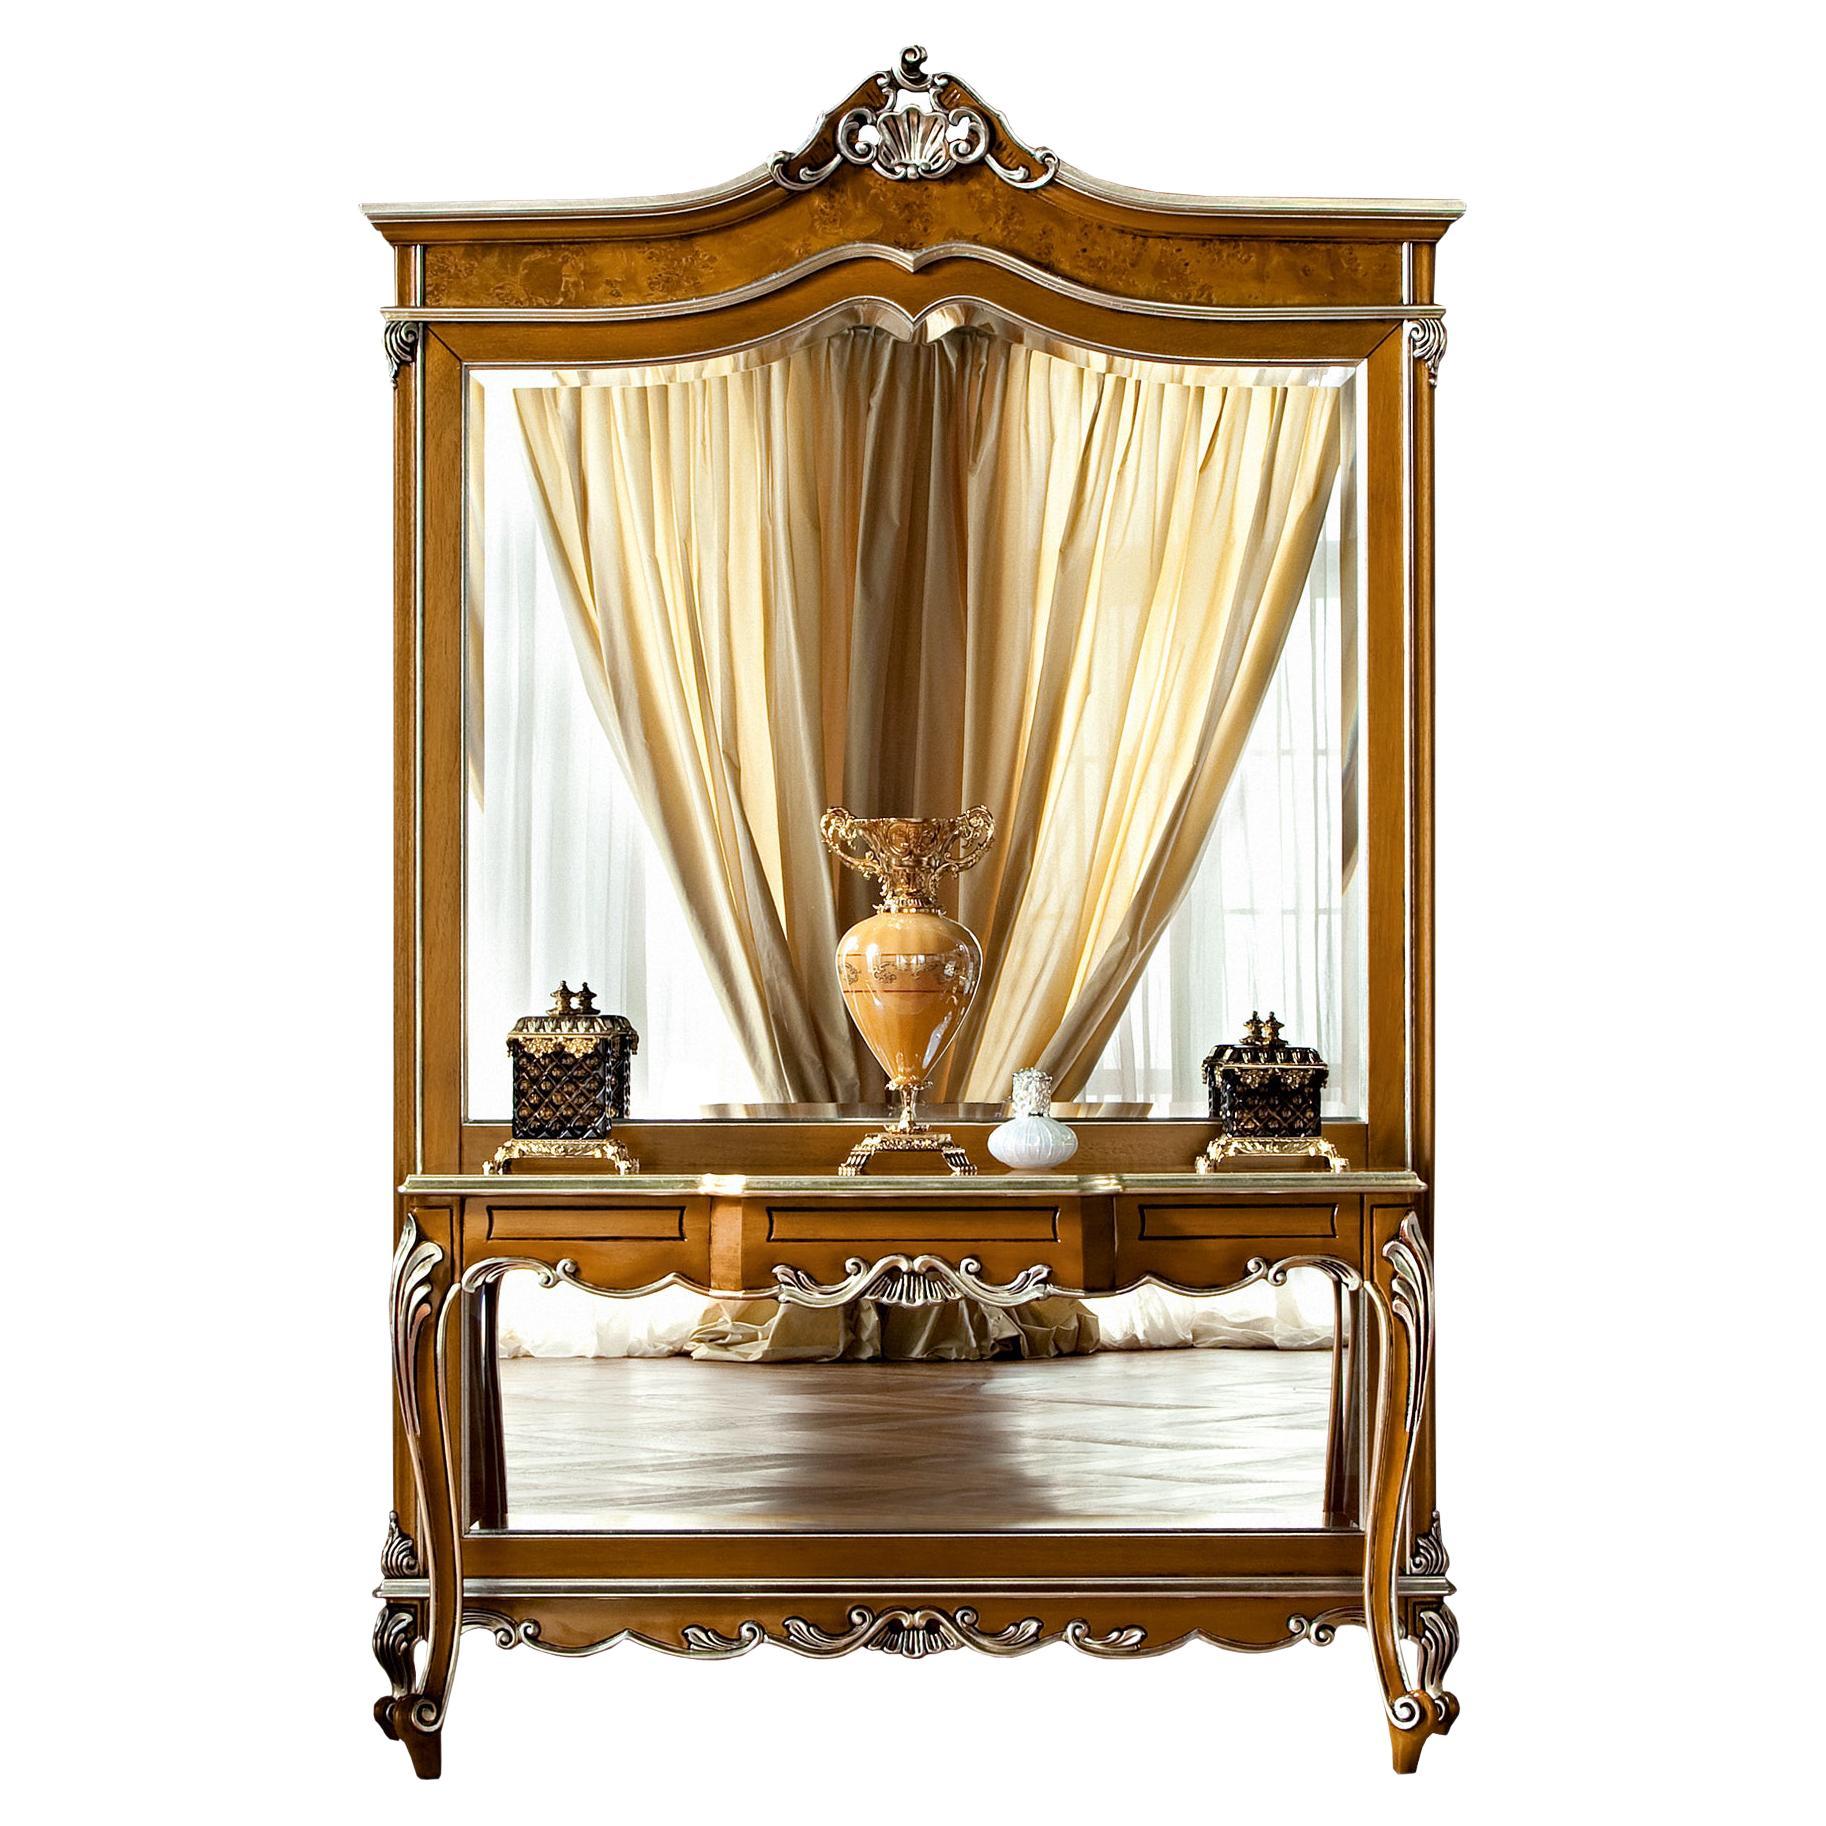 Neo-Classical Natural Walnut Finish Console with Silver Leaf Decorations